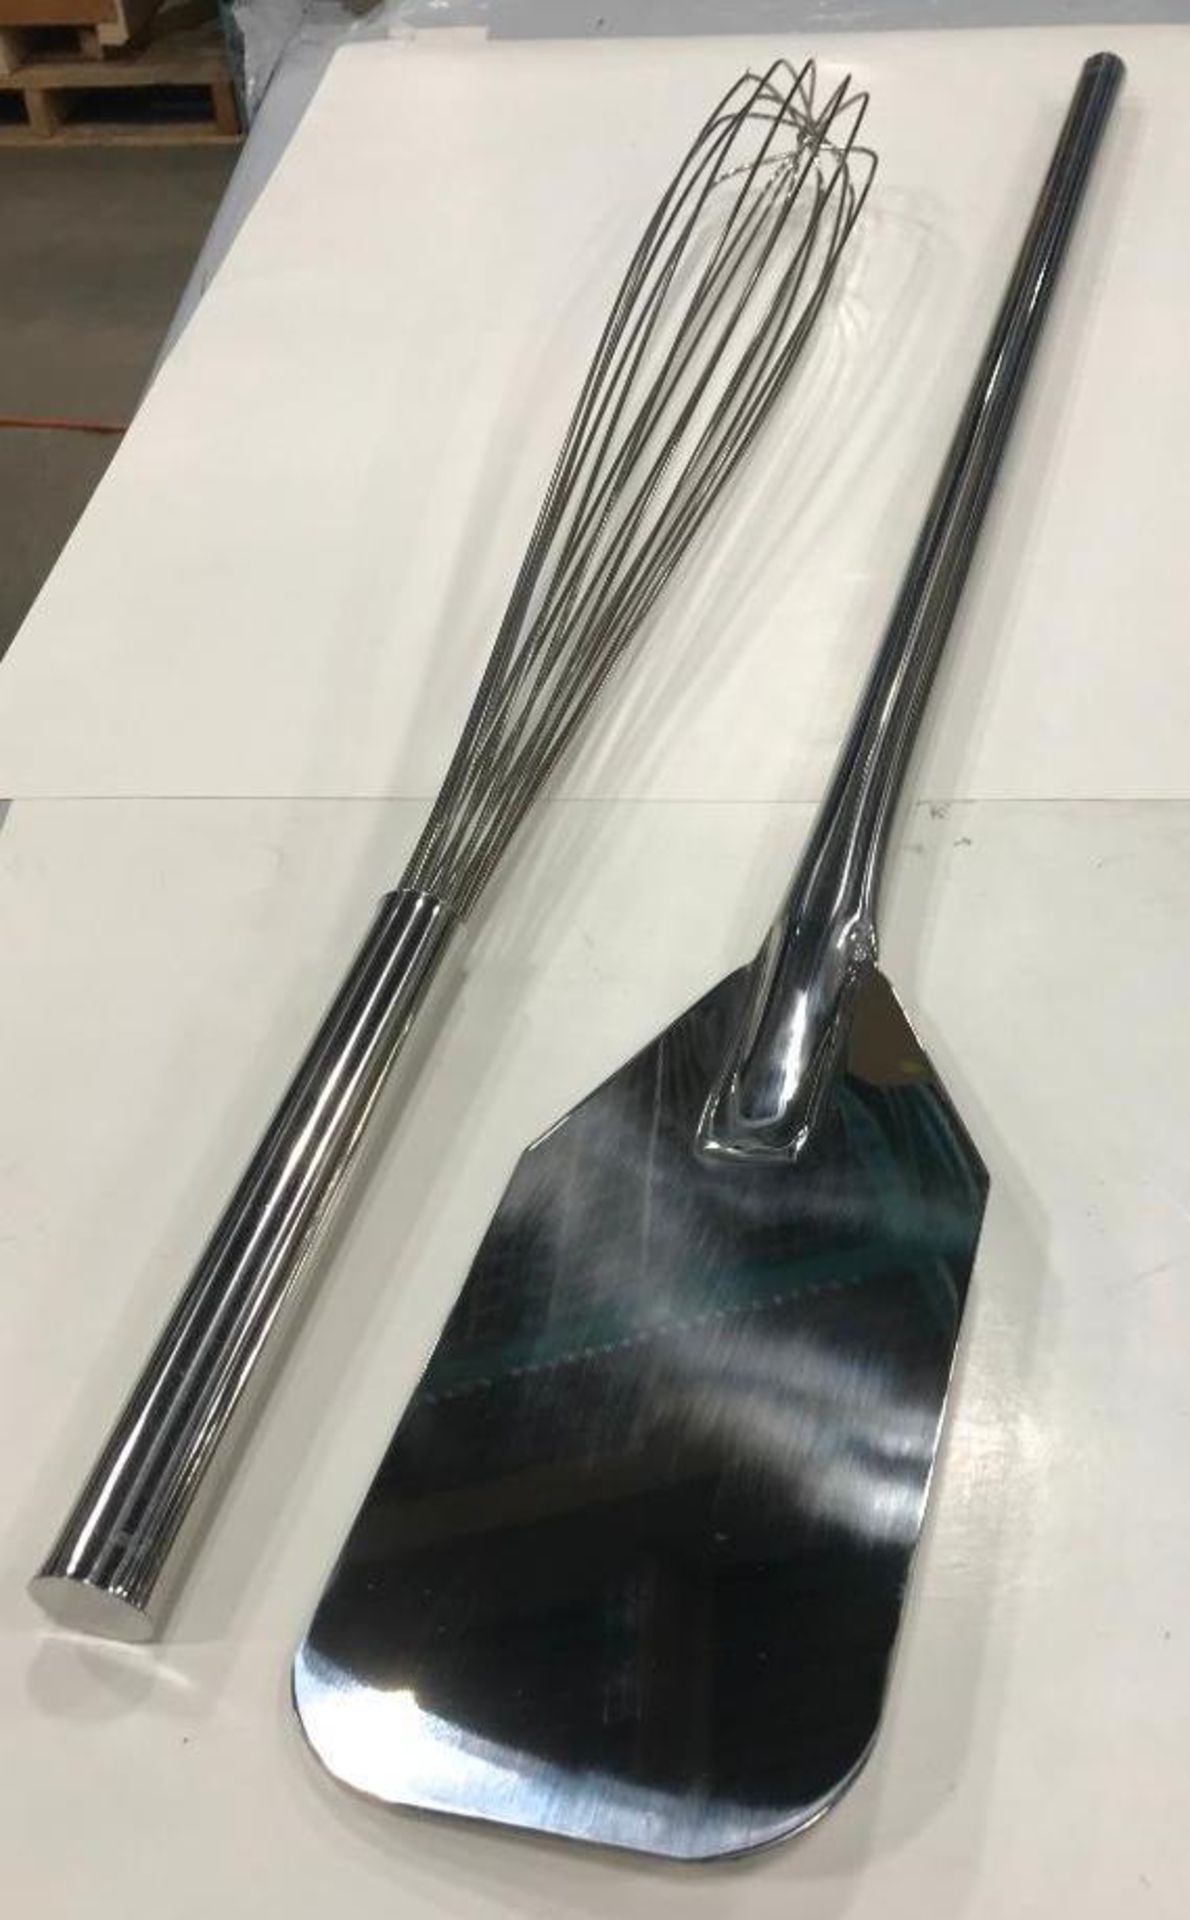 36" STAINLESS STEEL MIXING PADDLE & 30" STAINLESS STEEL FRENCH HOTEL WHIP - Image 2 of 2